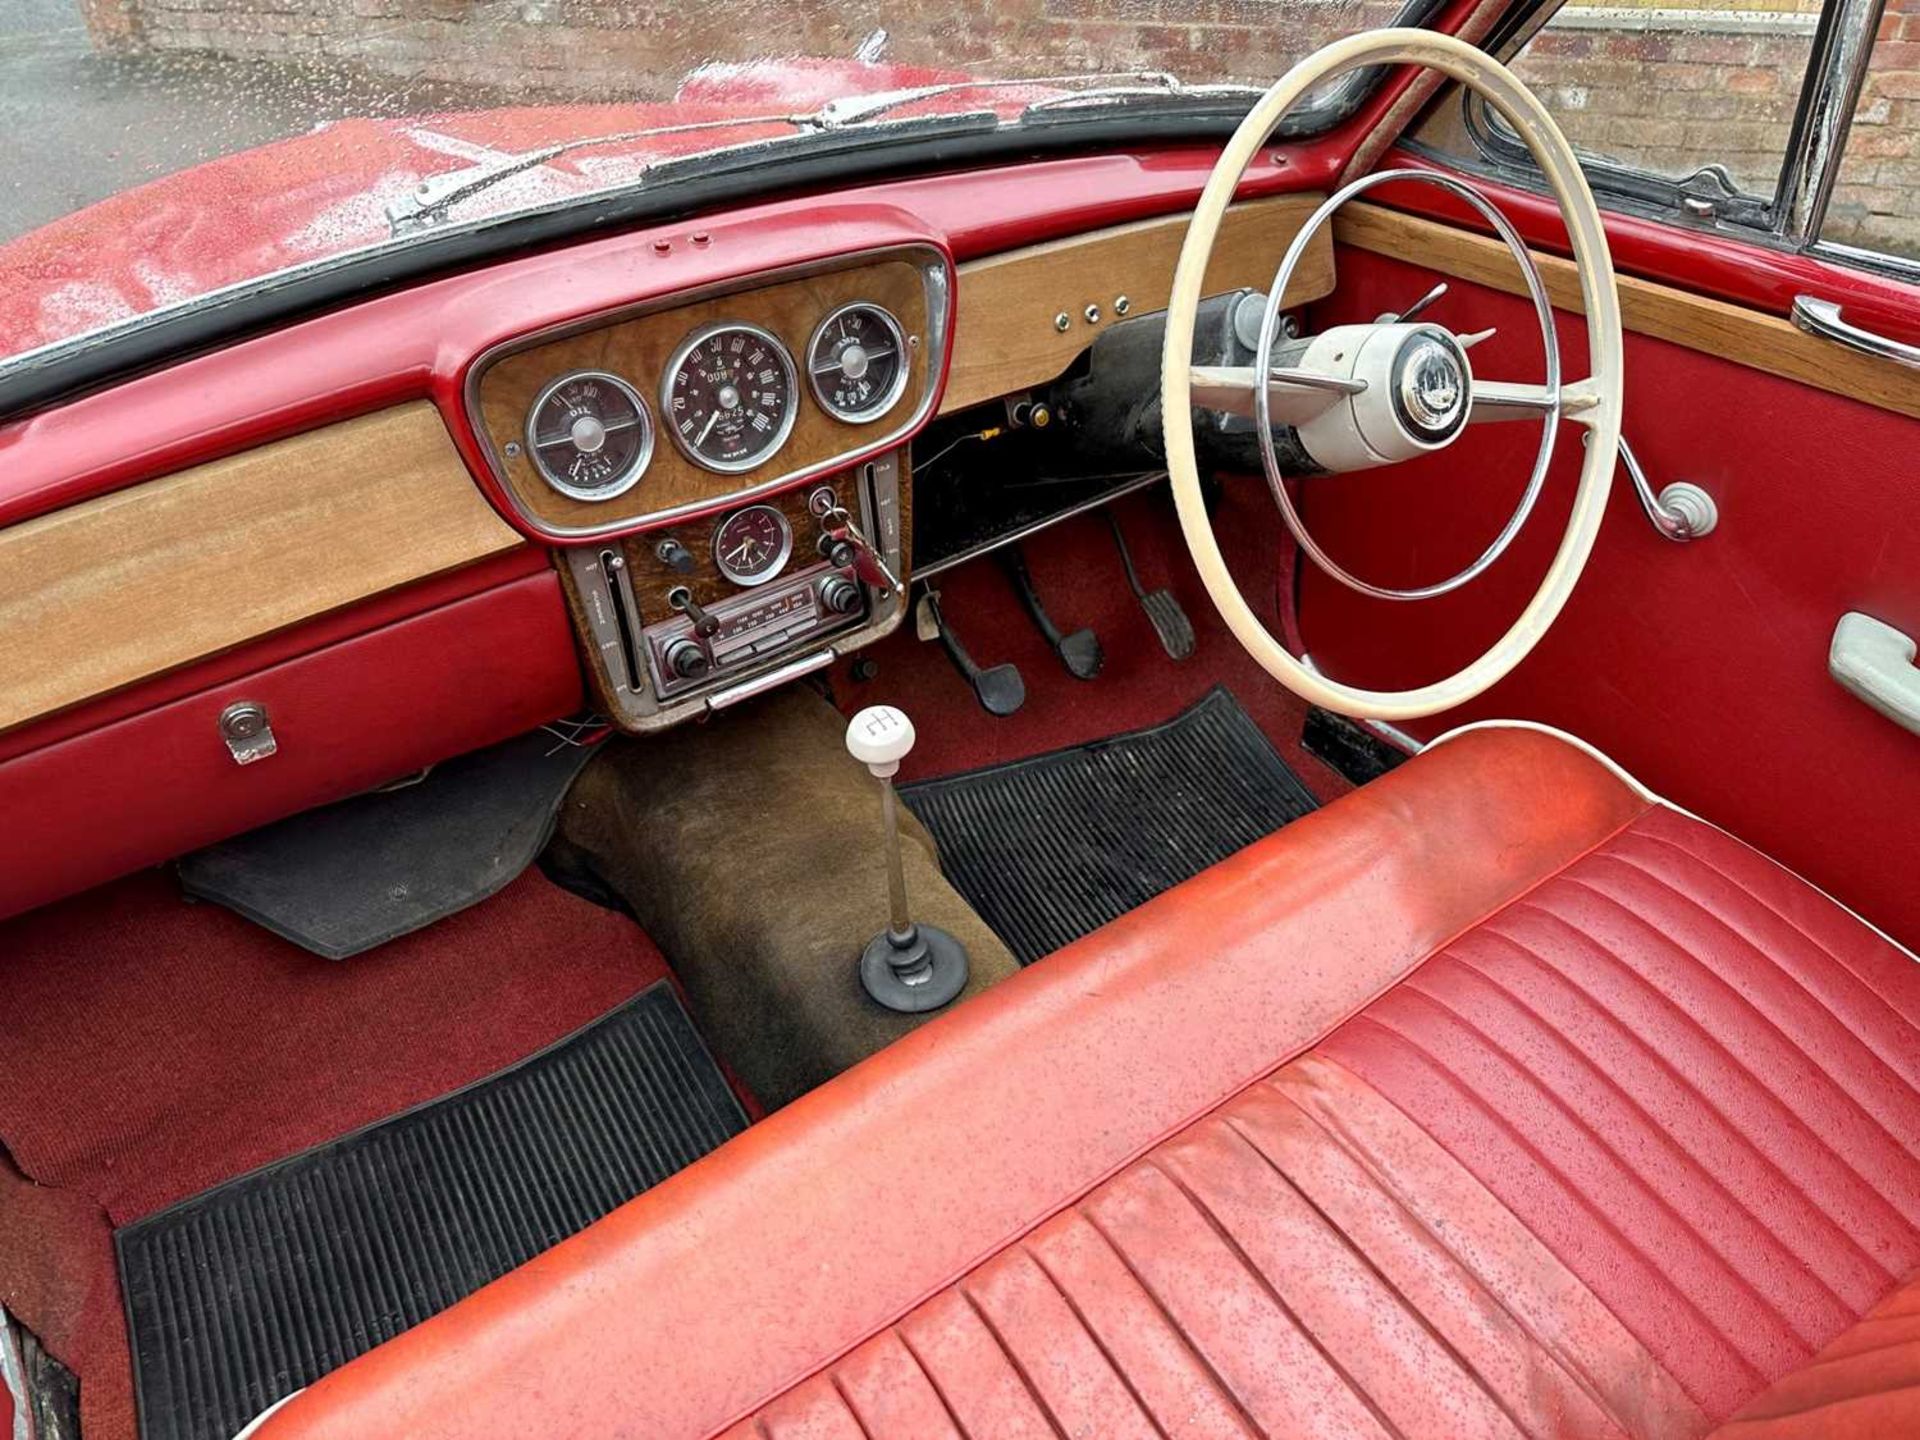 1961 Singer Gazelle Convertible Comes complete with overdrive, period radio and badge bar - Image 53 of 95